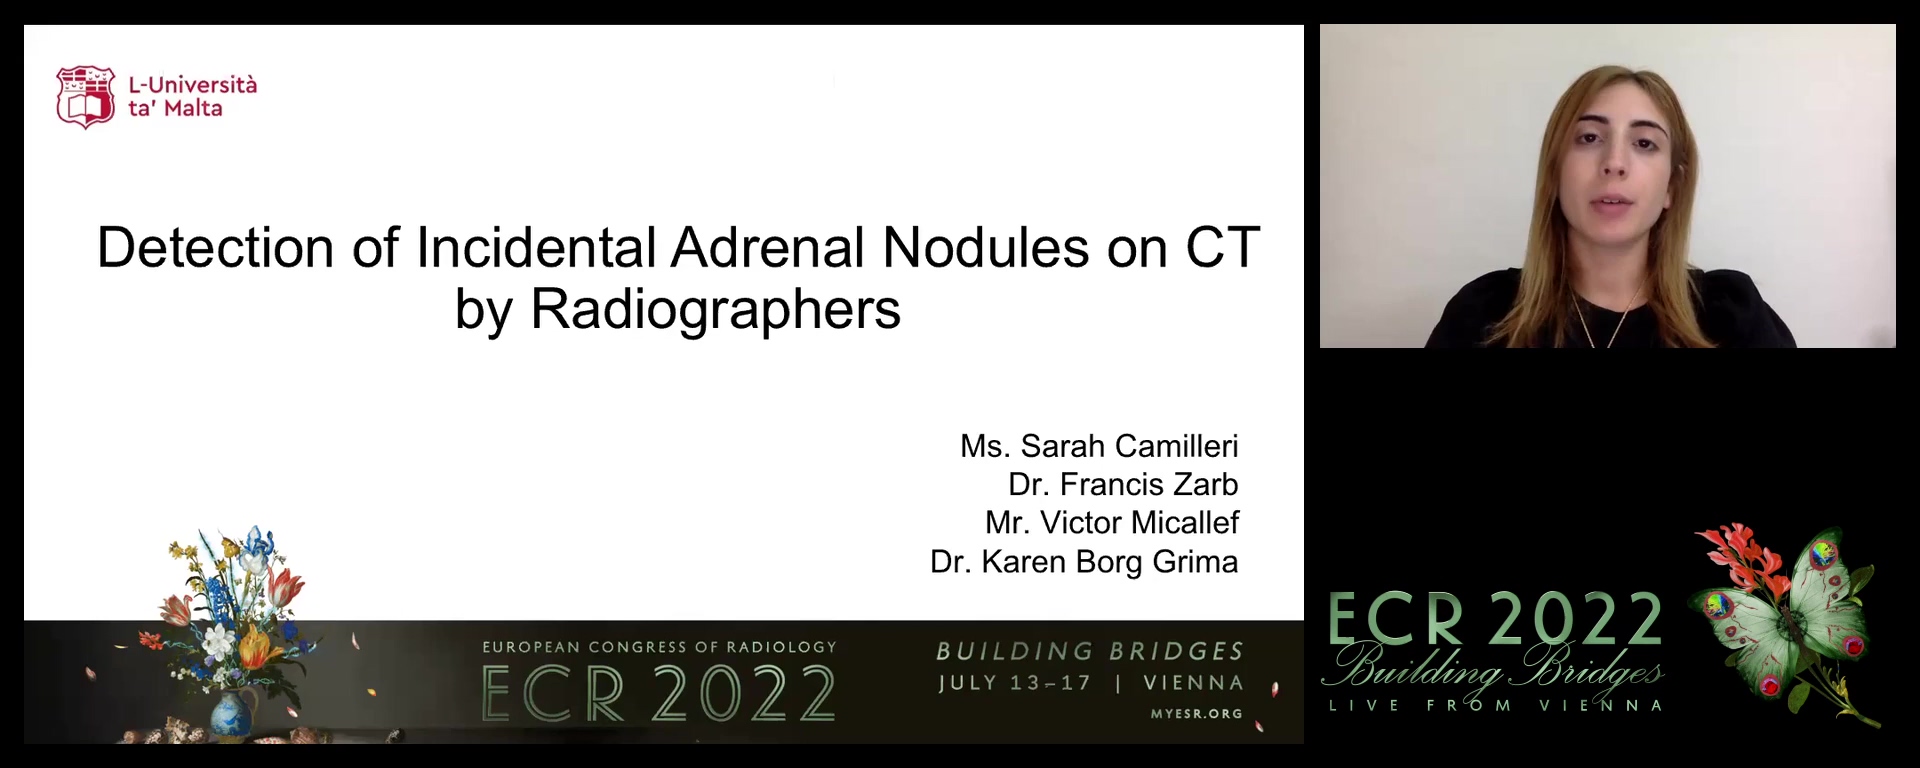 Detection of incidental adrenal nodules on CT by radiographers - Sarah Camilleri, Rabat / MT